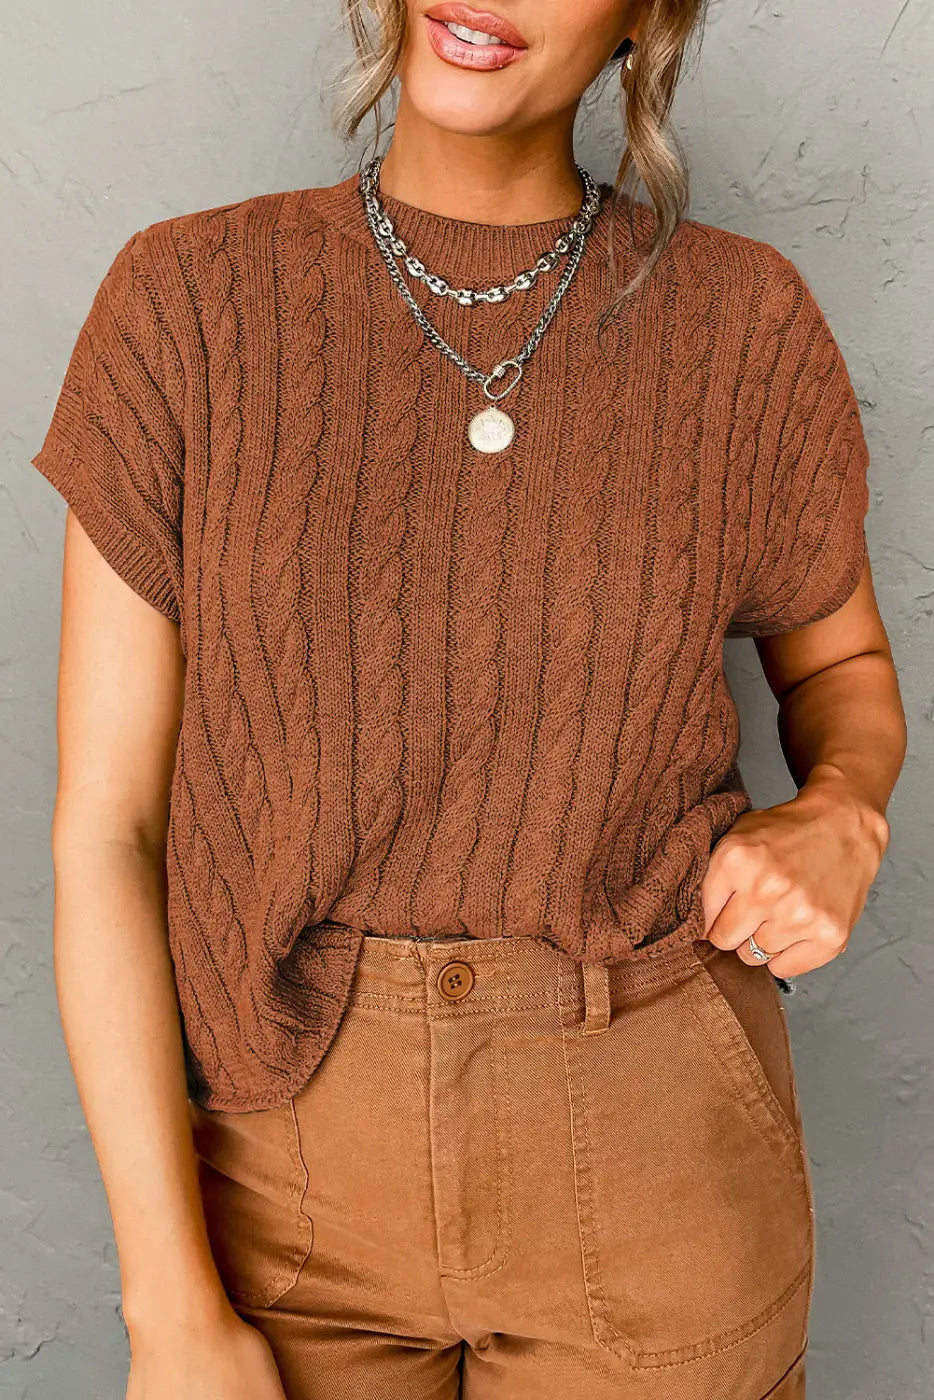 Cable knit short sleeve sweater - chestnut / 2xl / 55% acrylic + 45% cotton - sweaters